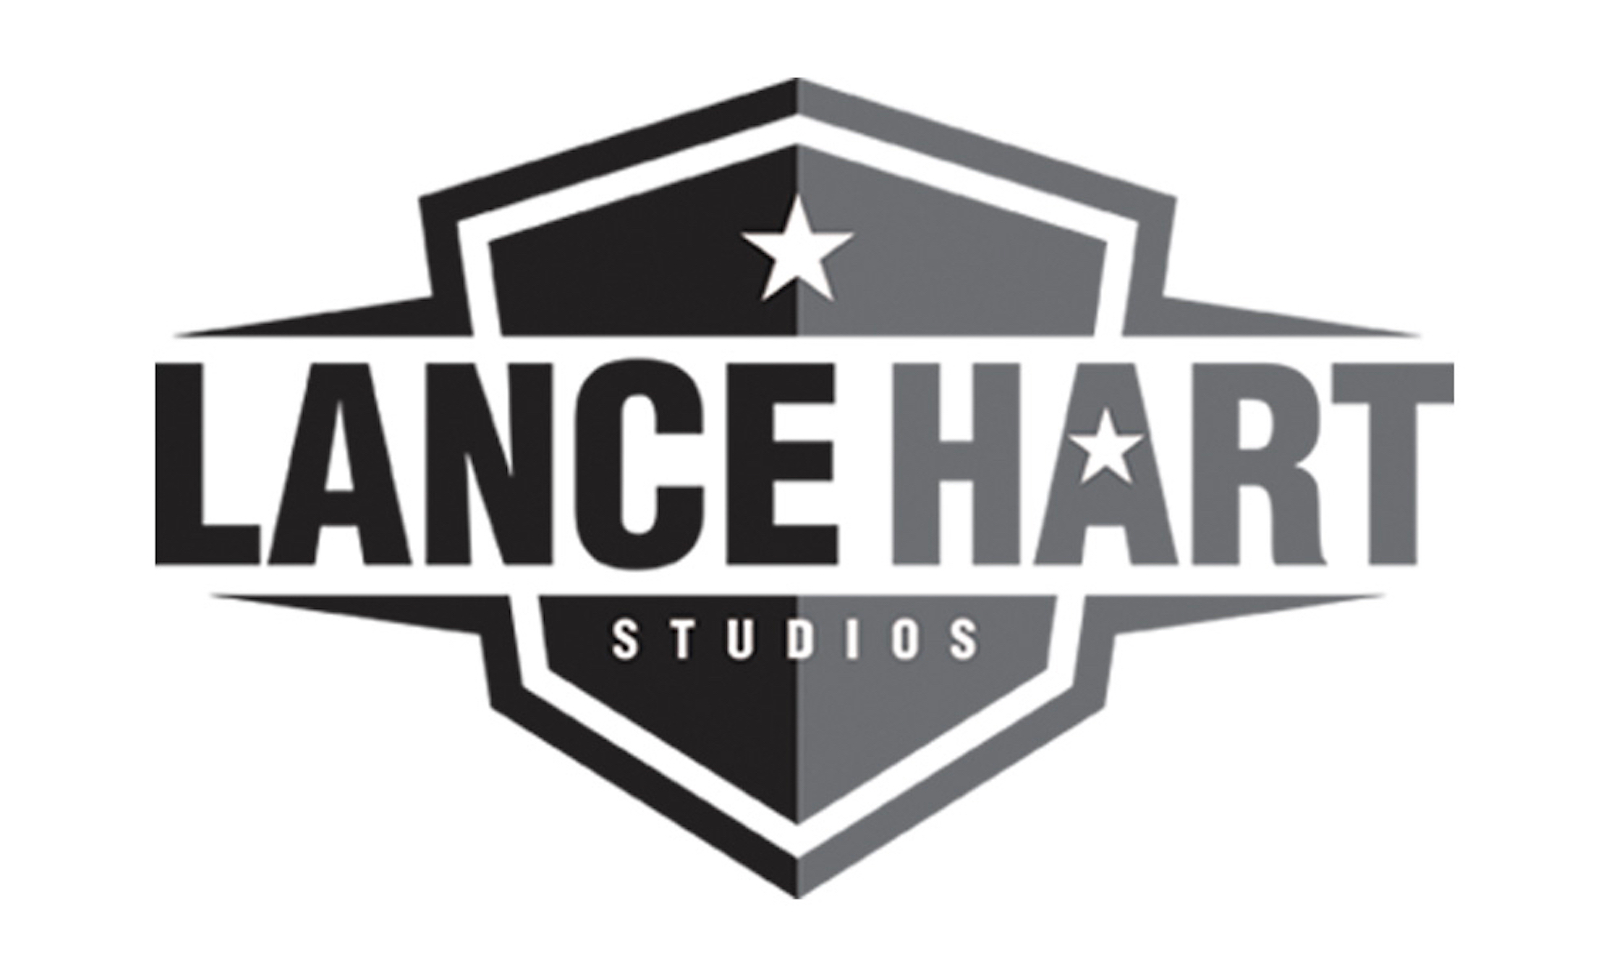 Lance Hart Studios' 1st Two Titles Now Available on AEBN